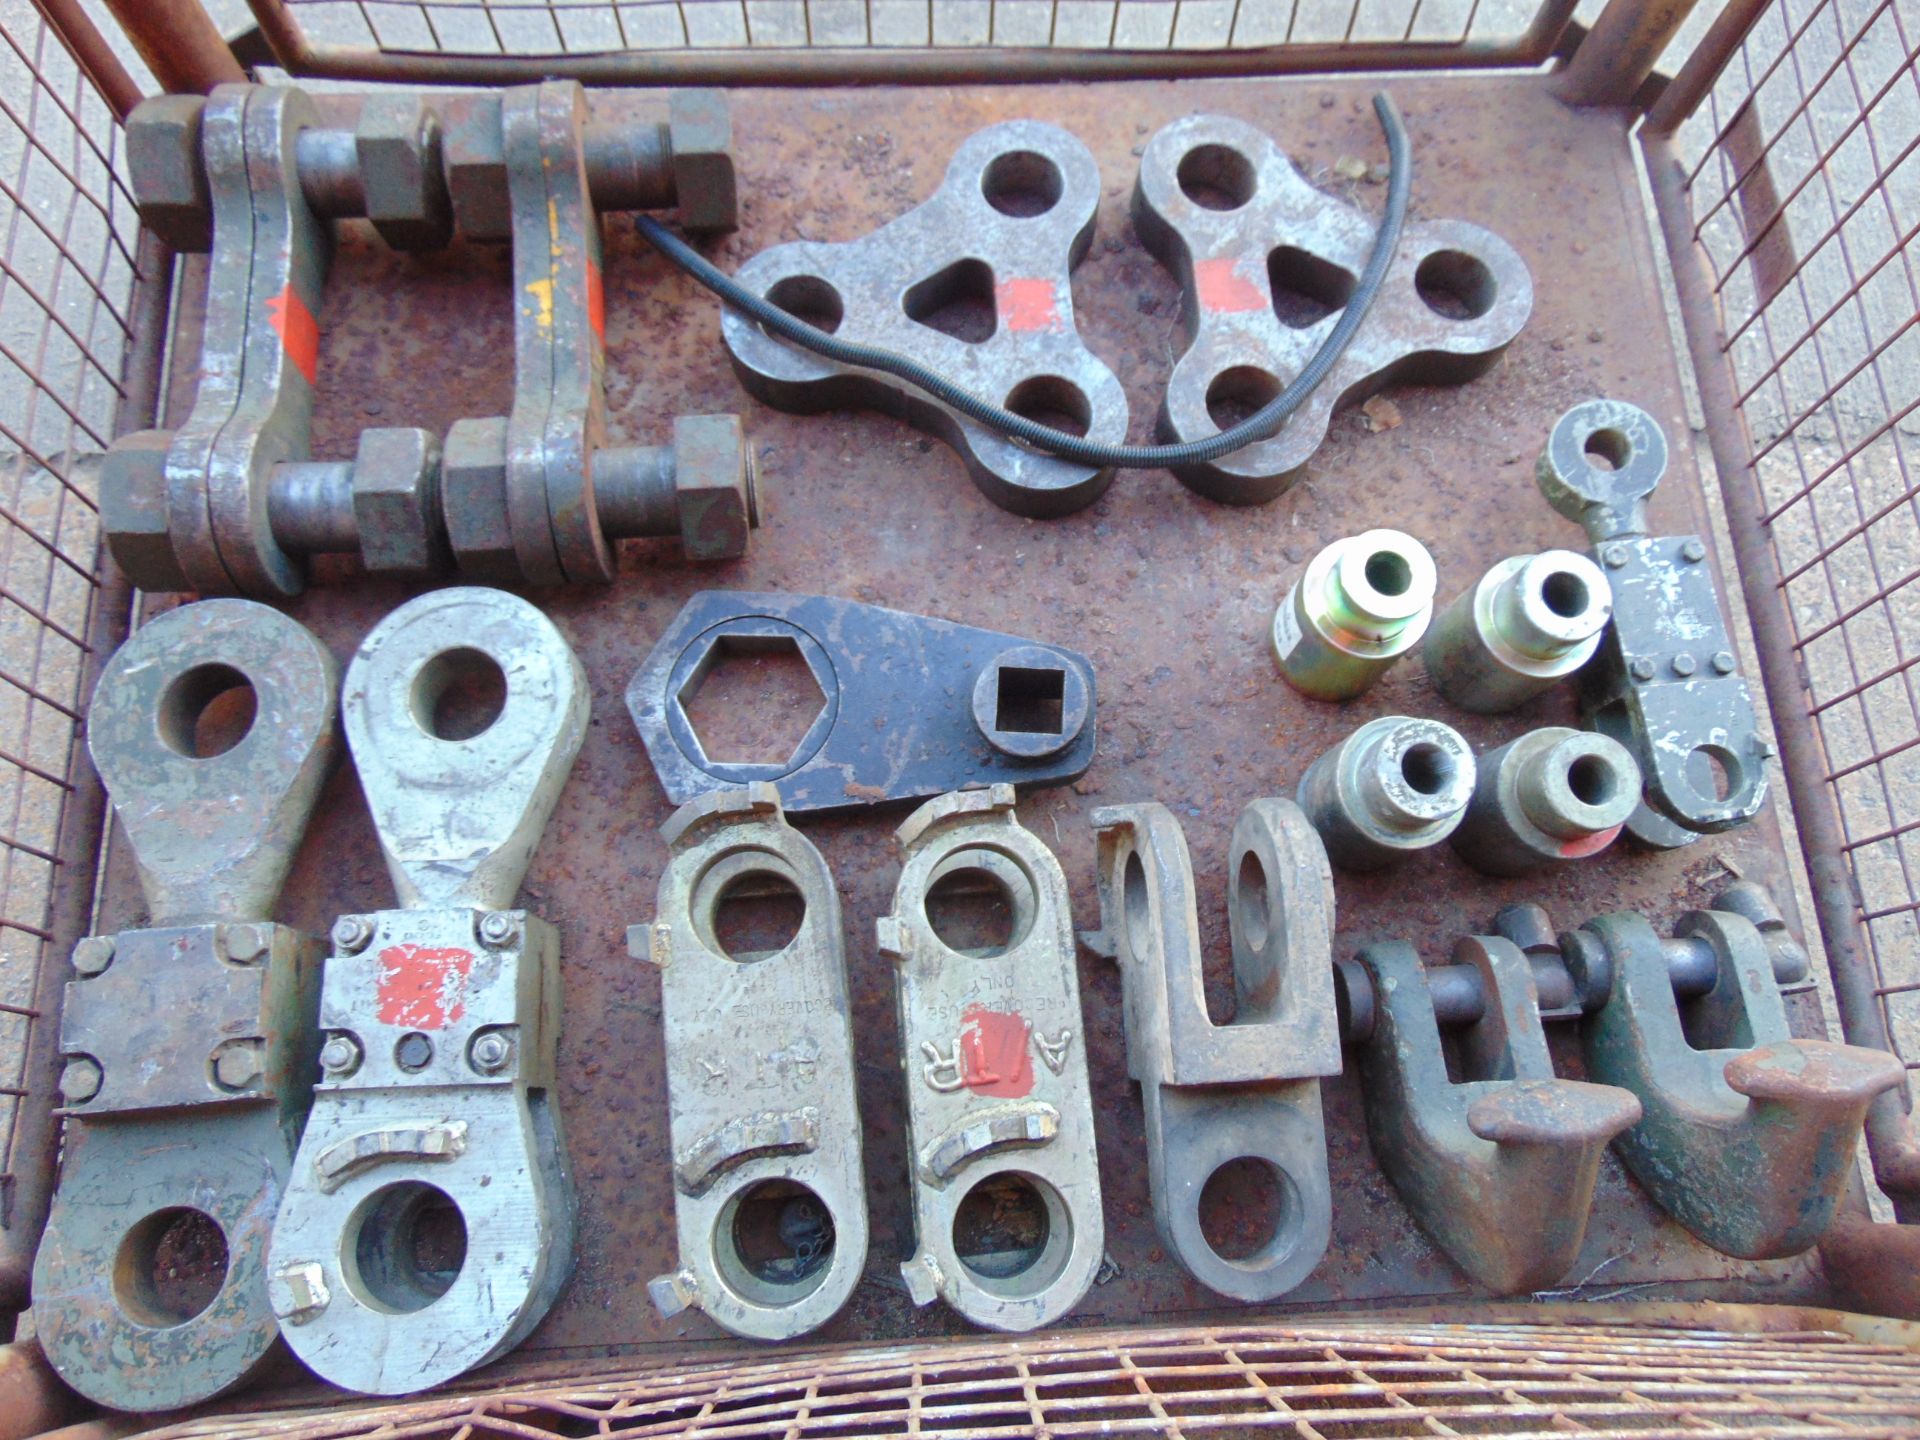 1 x Stillage of Heavy Duty Recovery Equipment Shackles etc